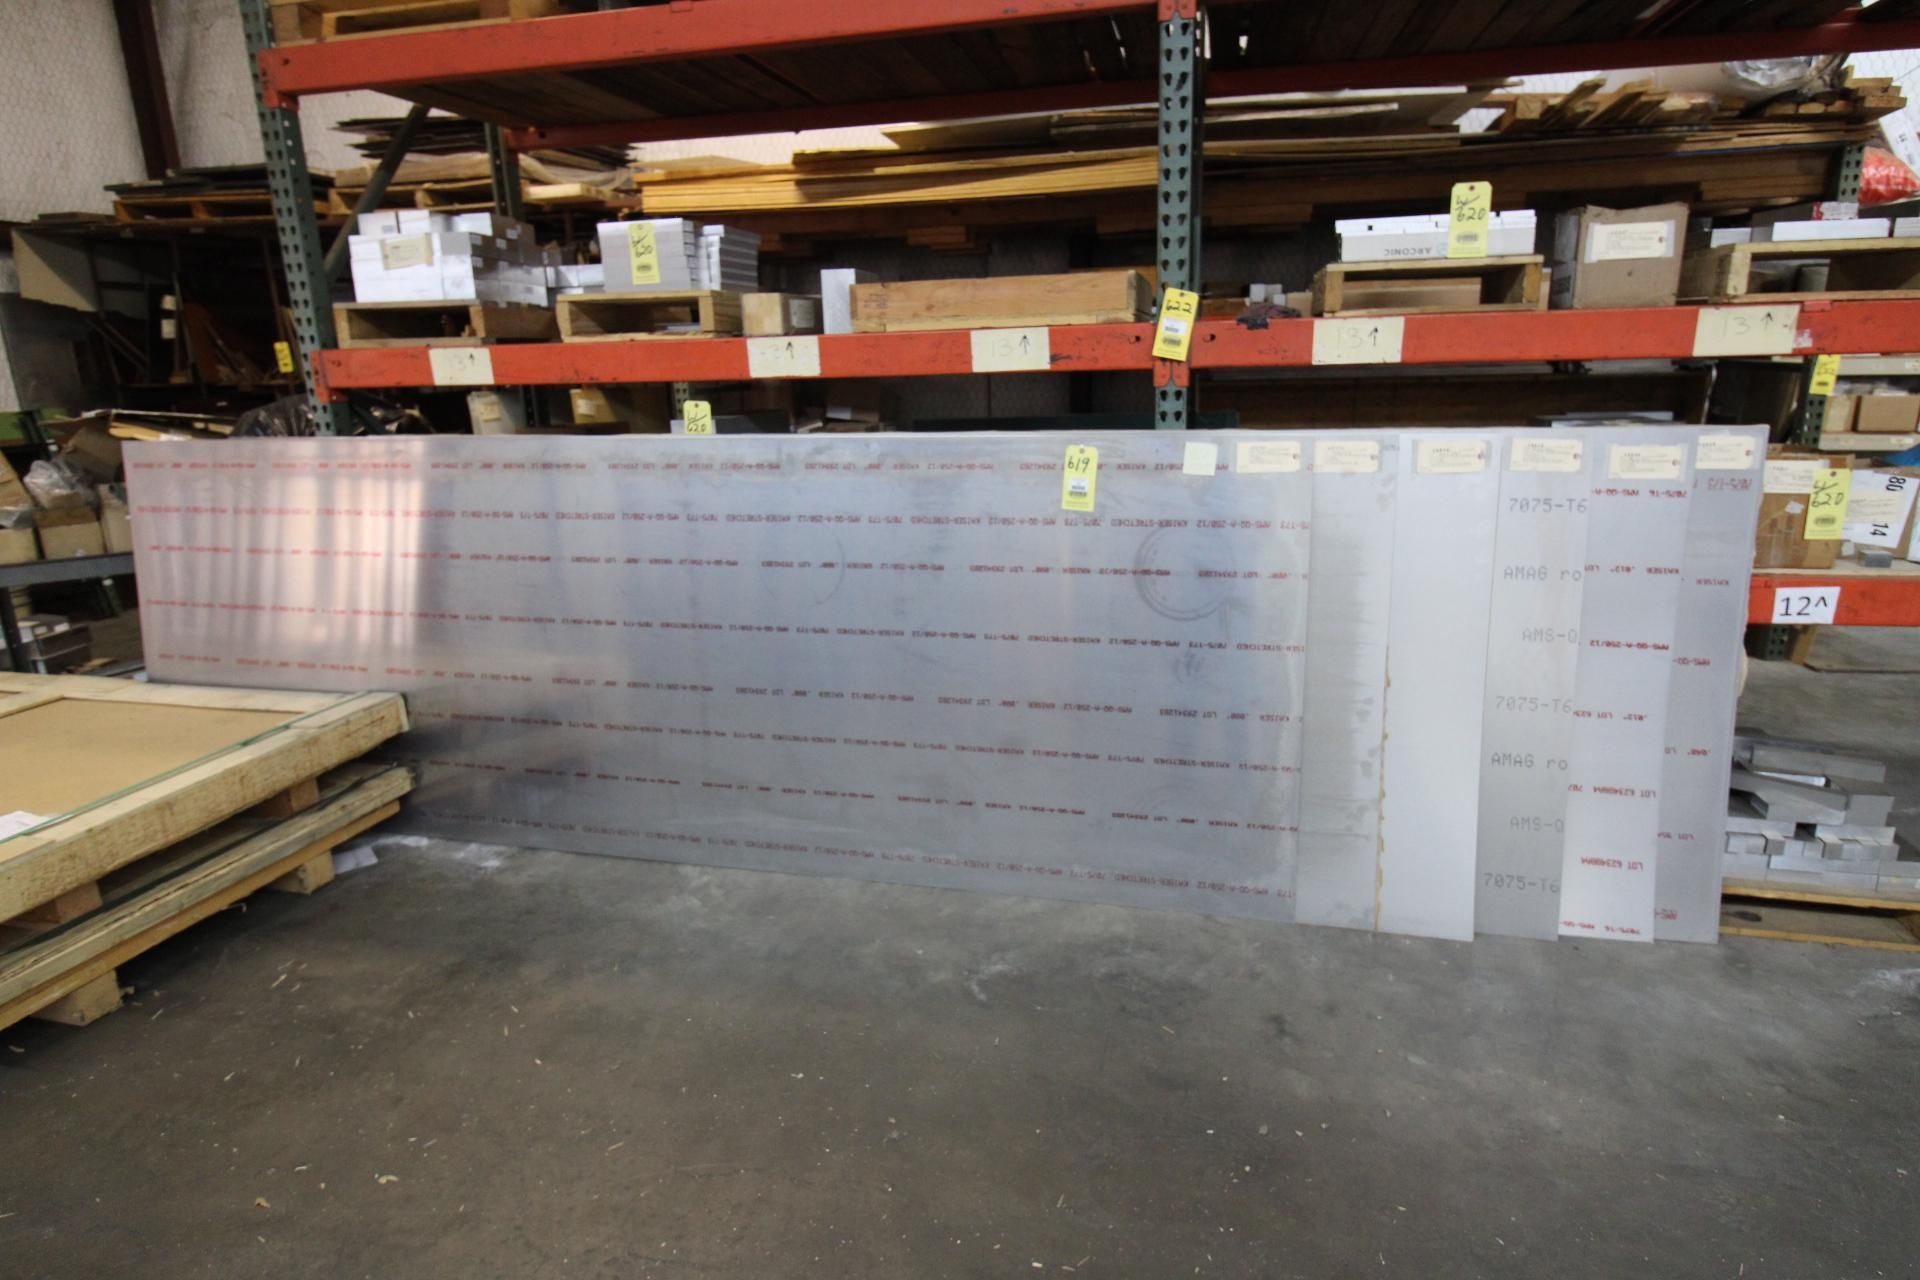 LOT OF ALUMINUM SHEET MATEIAL, Sample Inventory: (8) .090 thick x 48" x 144" 7075-T6, (2) .080 thick